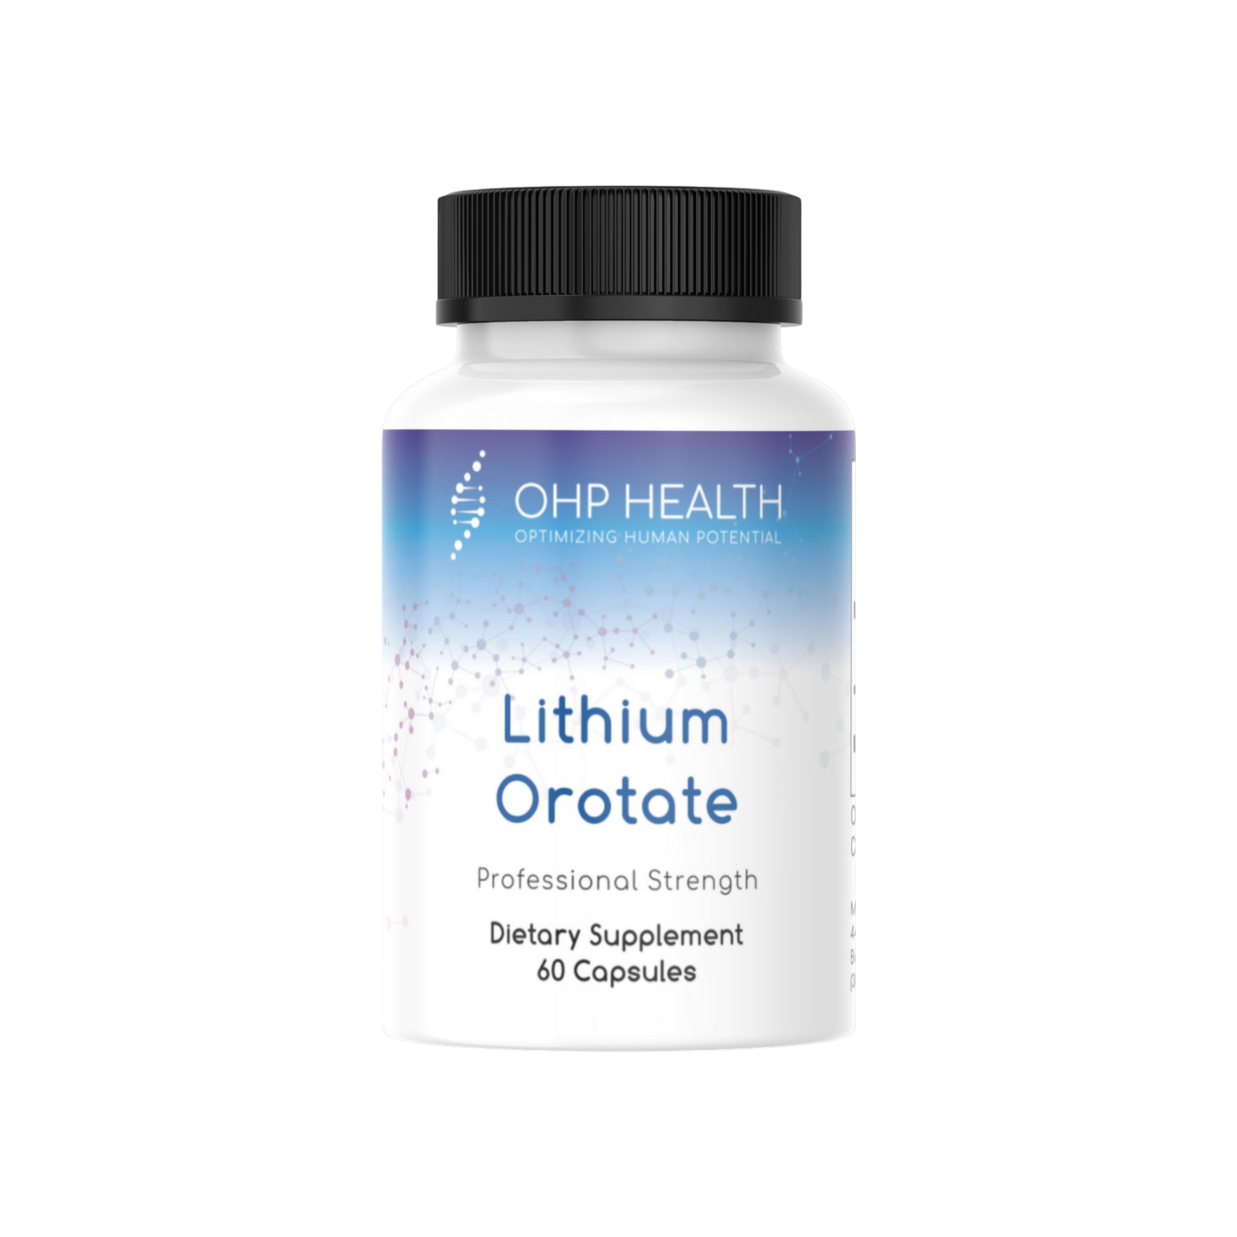 A bottle of Lithium Orotate | 10mg, 60 caps from OHP Health.